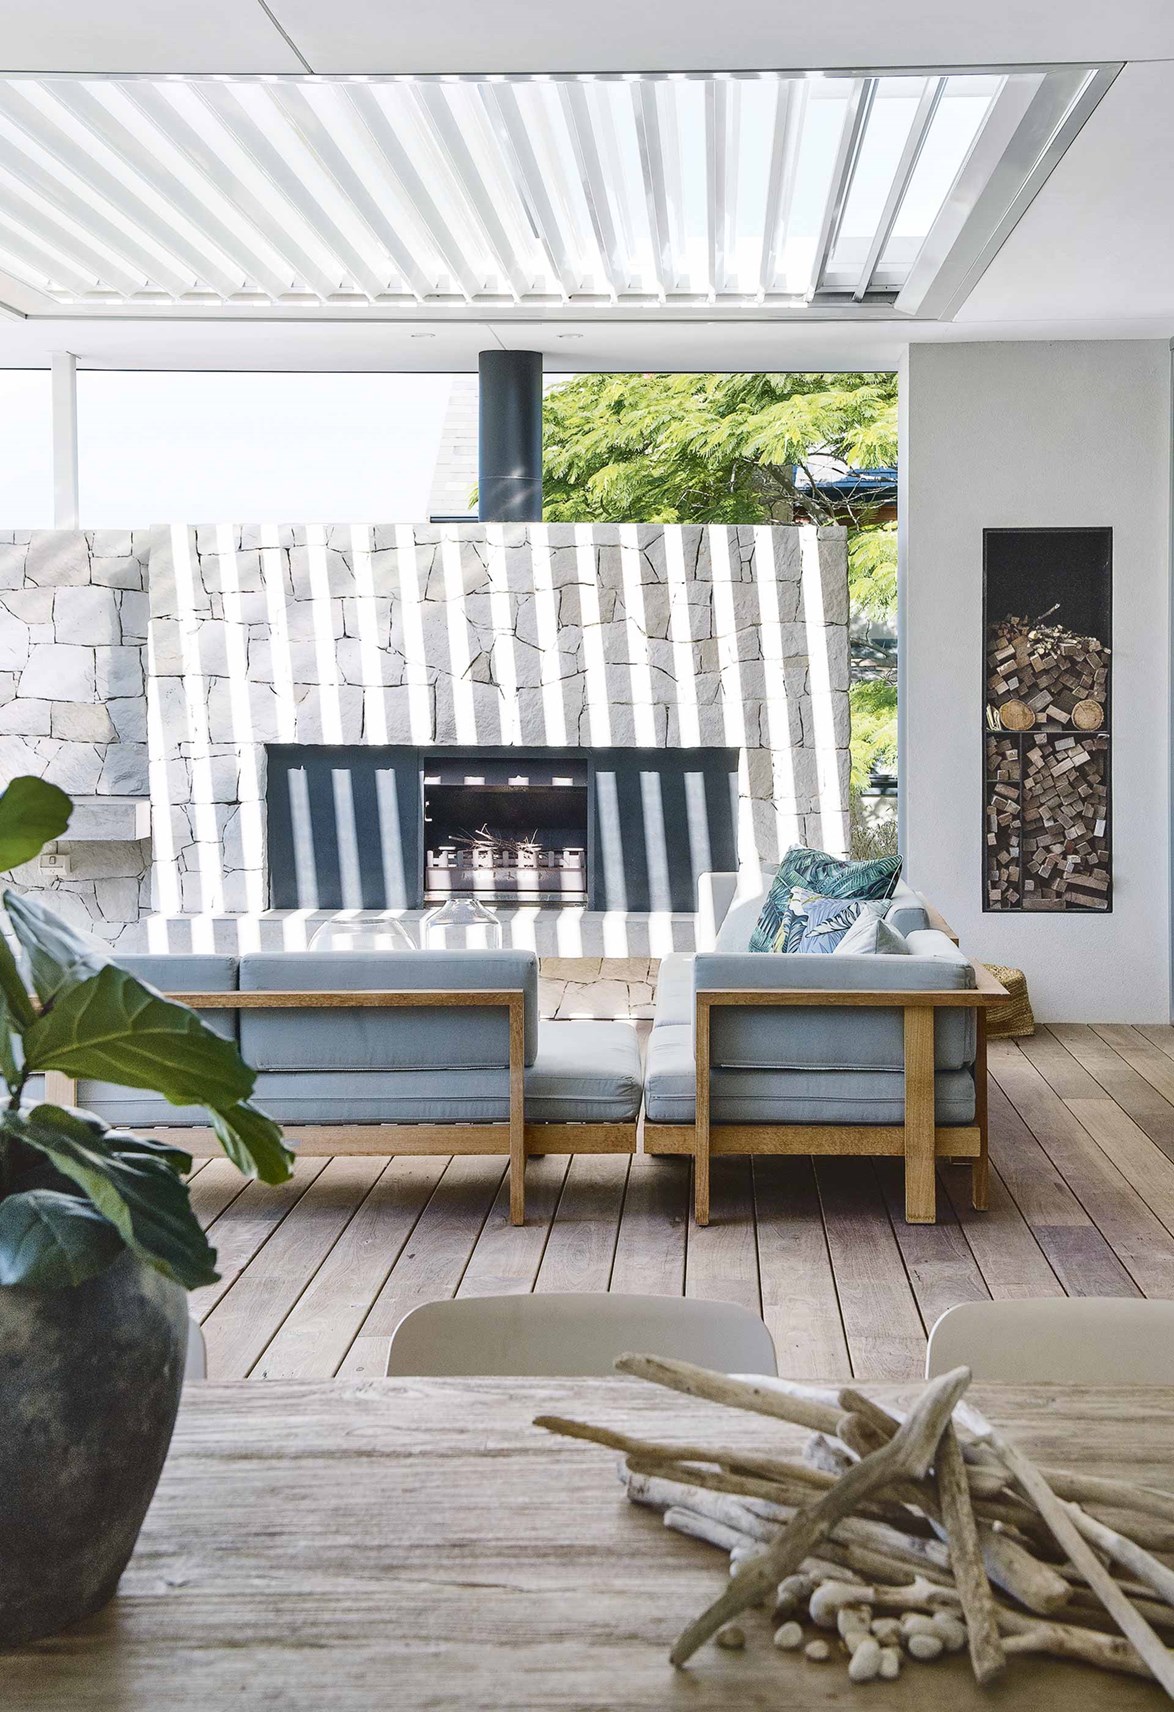 Using natural stone as a finish throughout the home is a wonderful to link indoors and outdoor spaces. Creating a visual journey in texture and tone, [this outdoor fireplace](https://www.homestolove.com.au/contemporary-eco-friendly-home-perth-17078|target="_blank") is clad in the same stone as the indoor fireplace, as well as retaining walls surrounding the pool deep in the backyard.